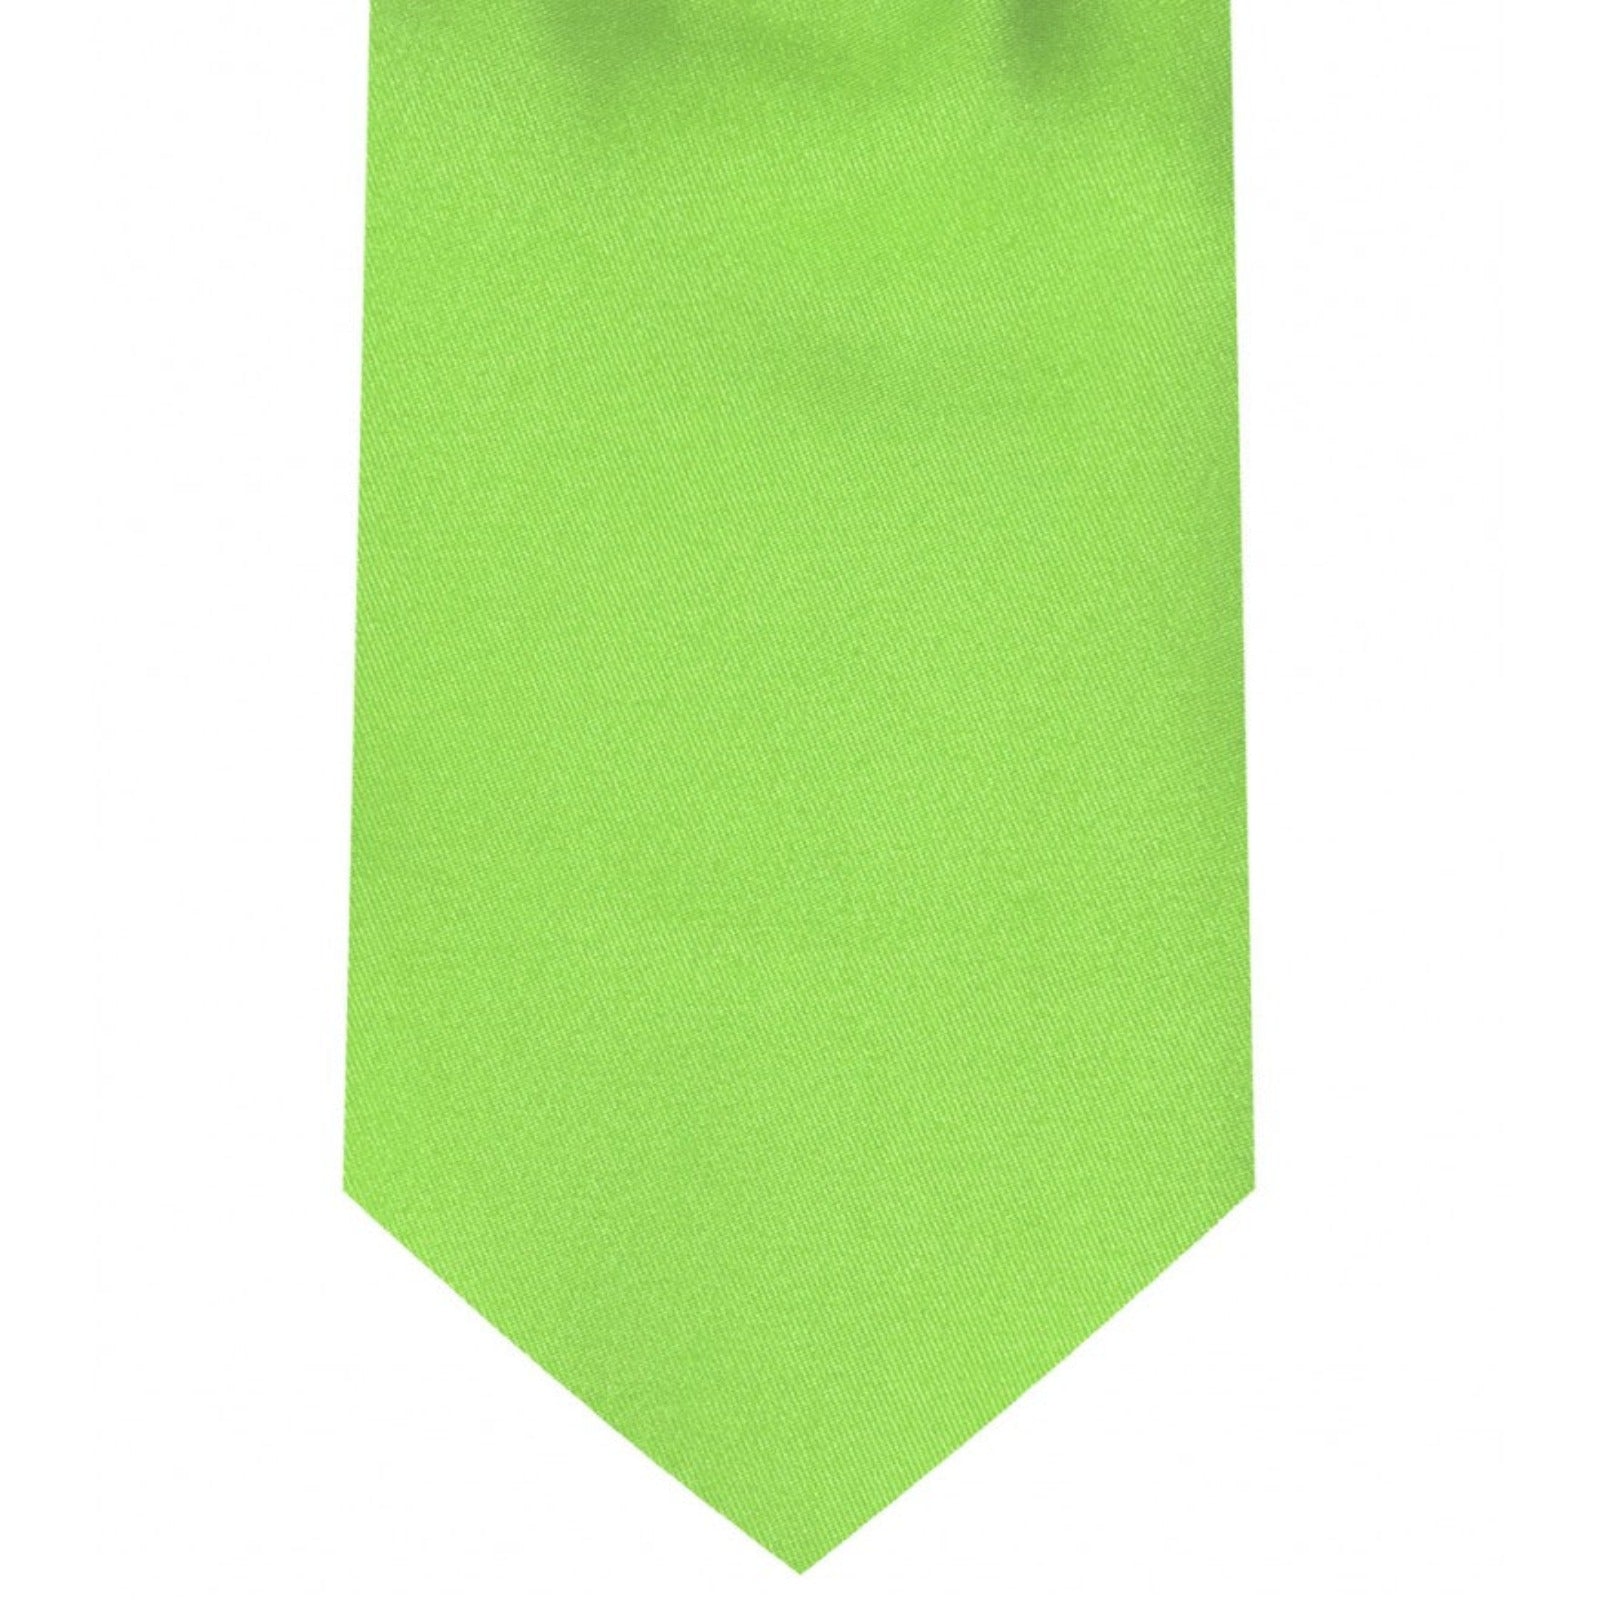 Classic Lime Tie Regular width 3.5 inches With Matching Pocket Square | KCT Menswear 